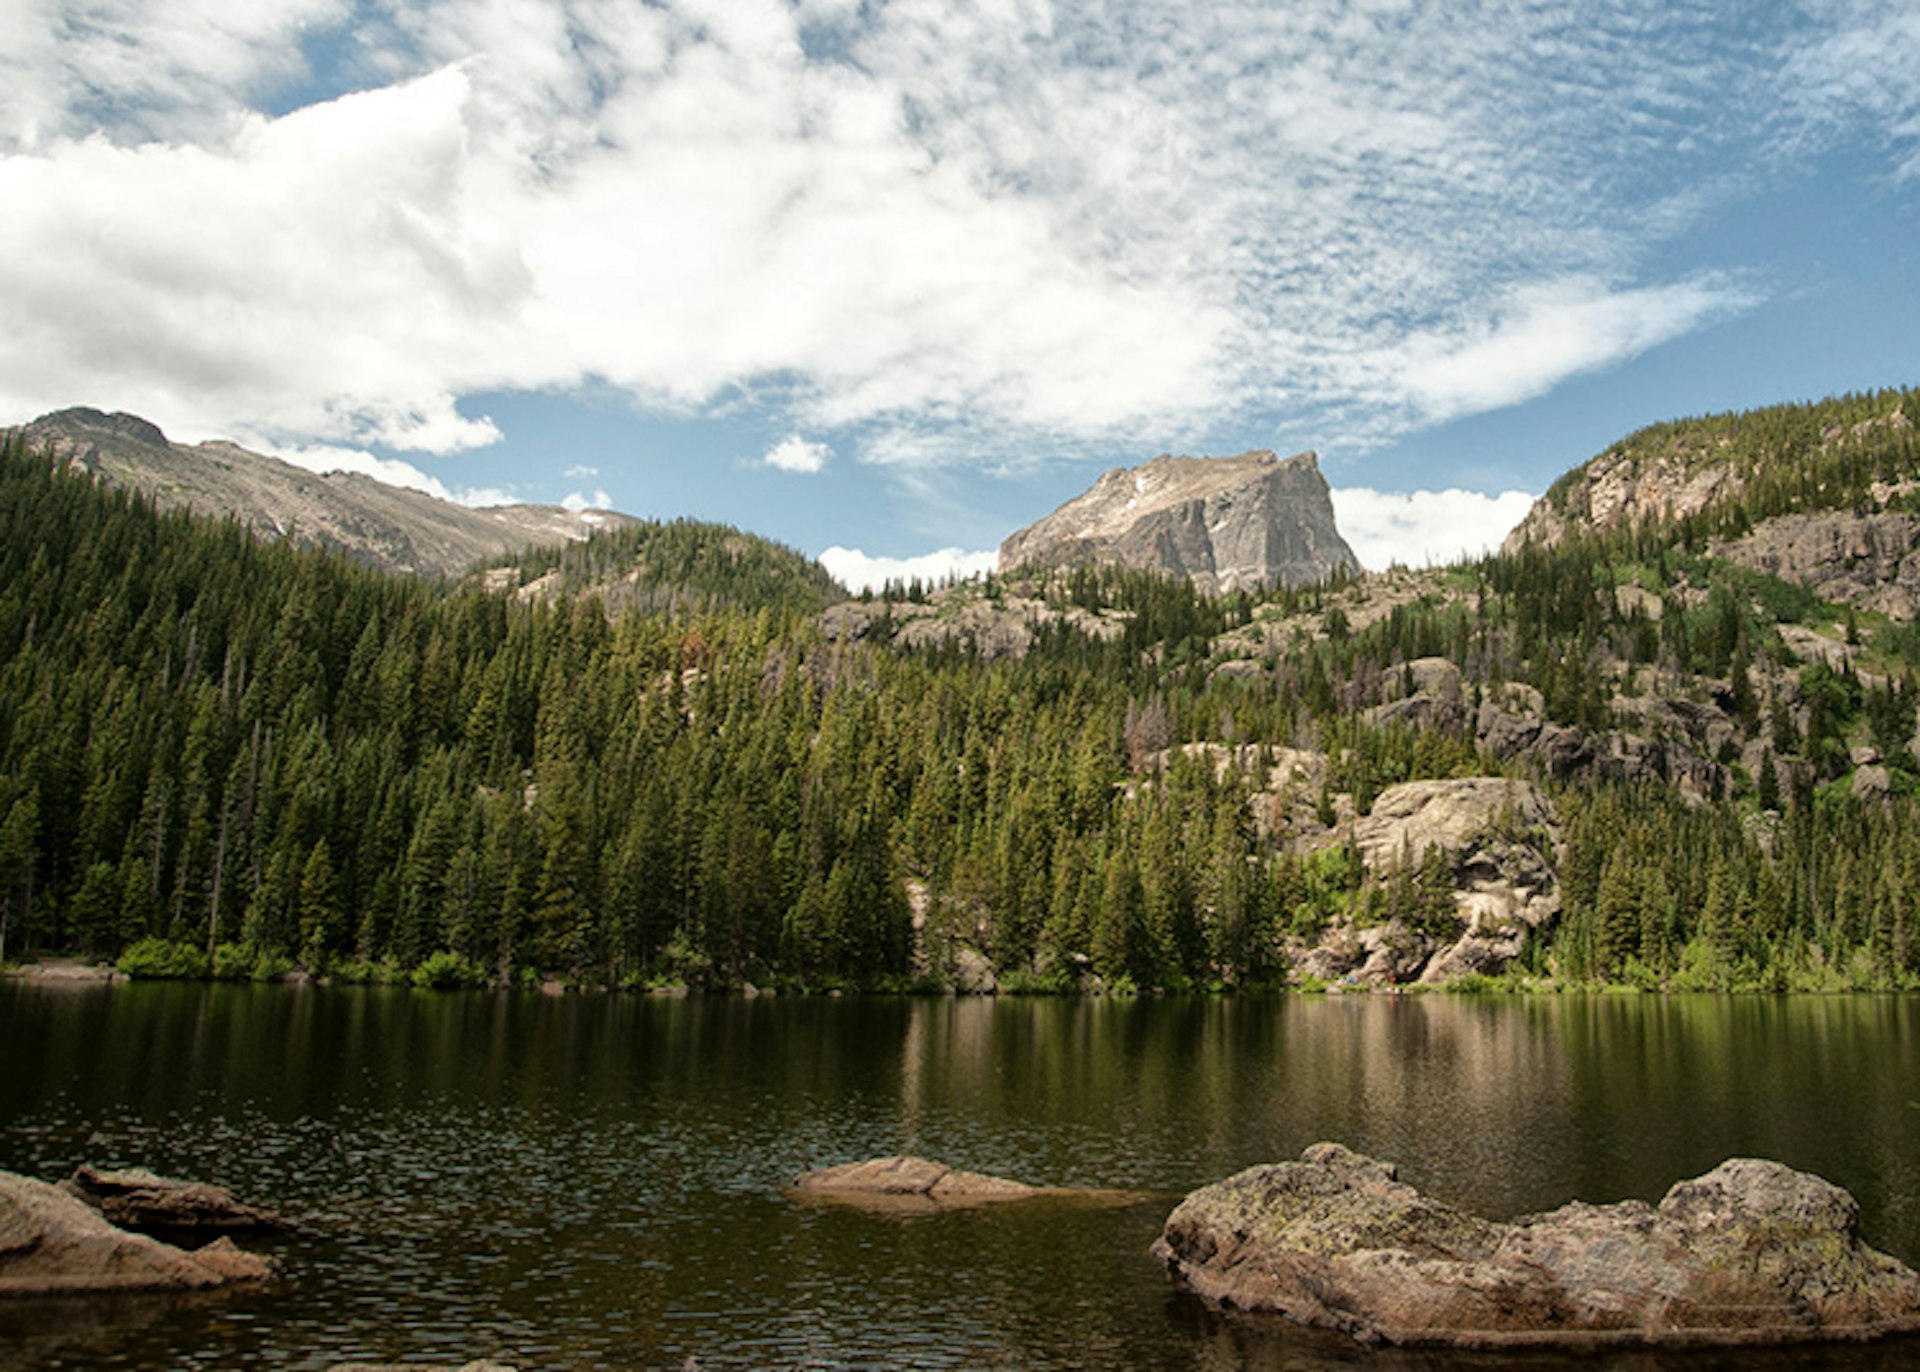 The serenity of Bear Lake affords spectacular views of nearby peaks. Image by txbowen / CC BY 2.0